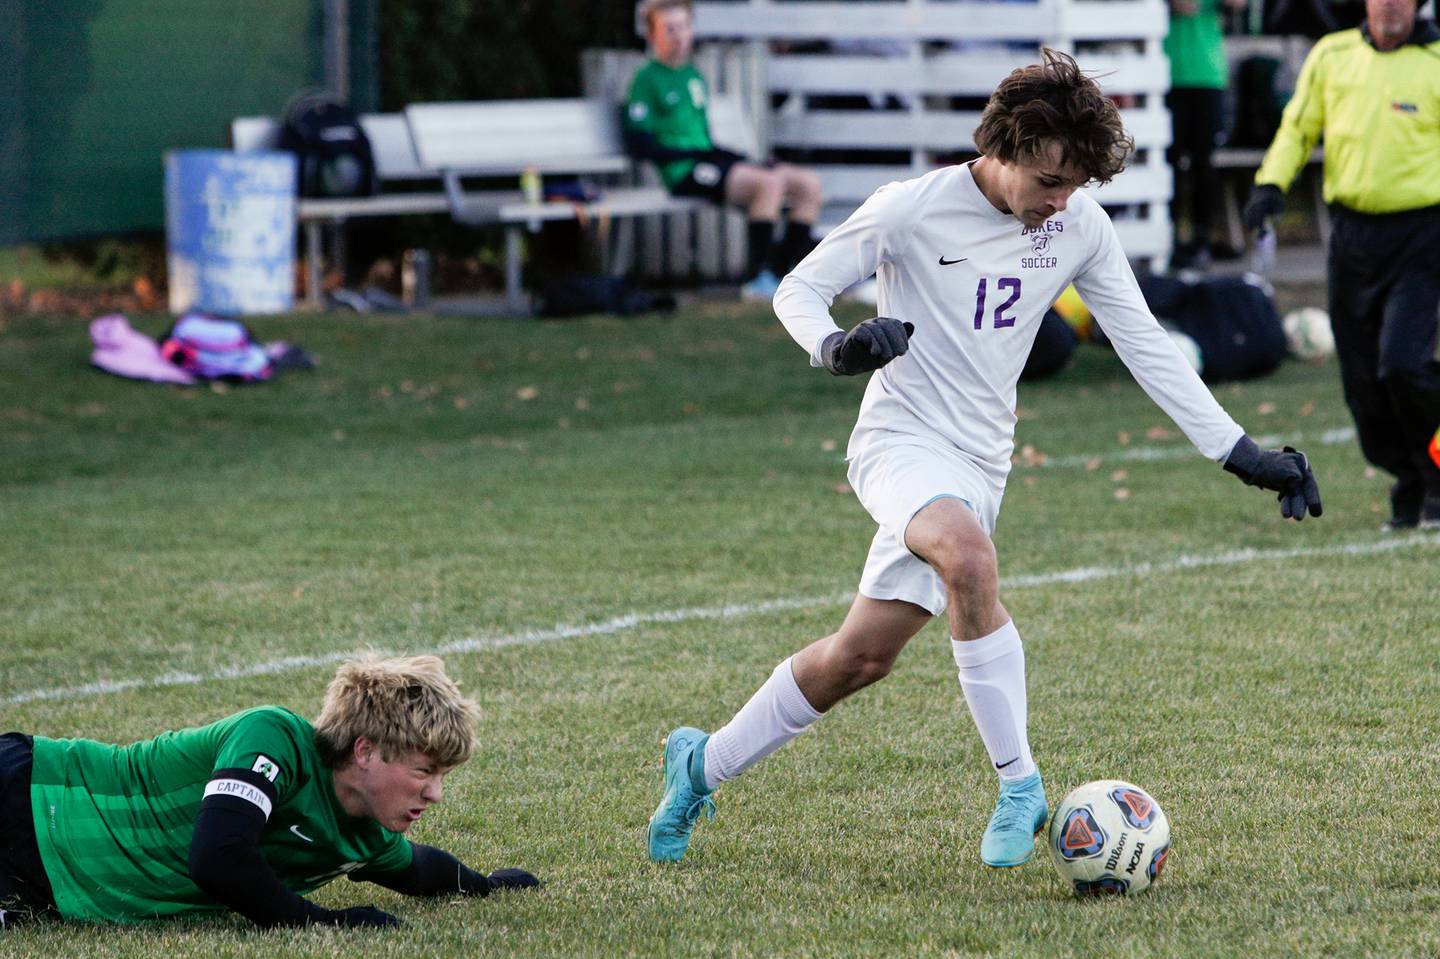 Dixon's Jacob Duet (12) dribbles the ball after evading Geneseo's Alex Slaymaker (17) during the second half of an IHSA class 2a boys soccer match, Tuesday, Oct. 18, 2022, in Geneseo.